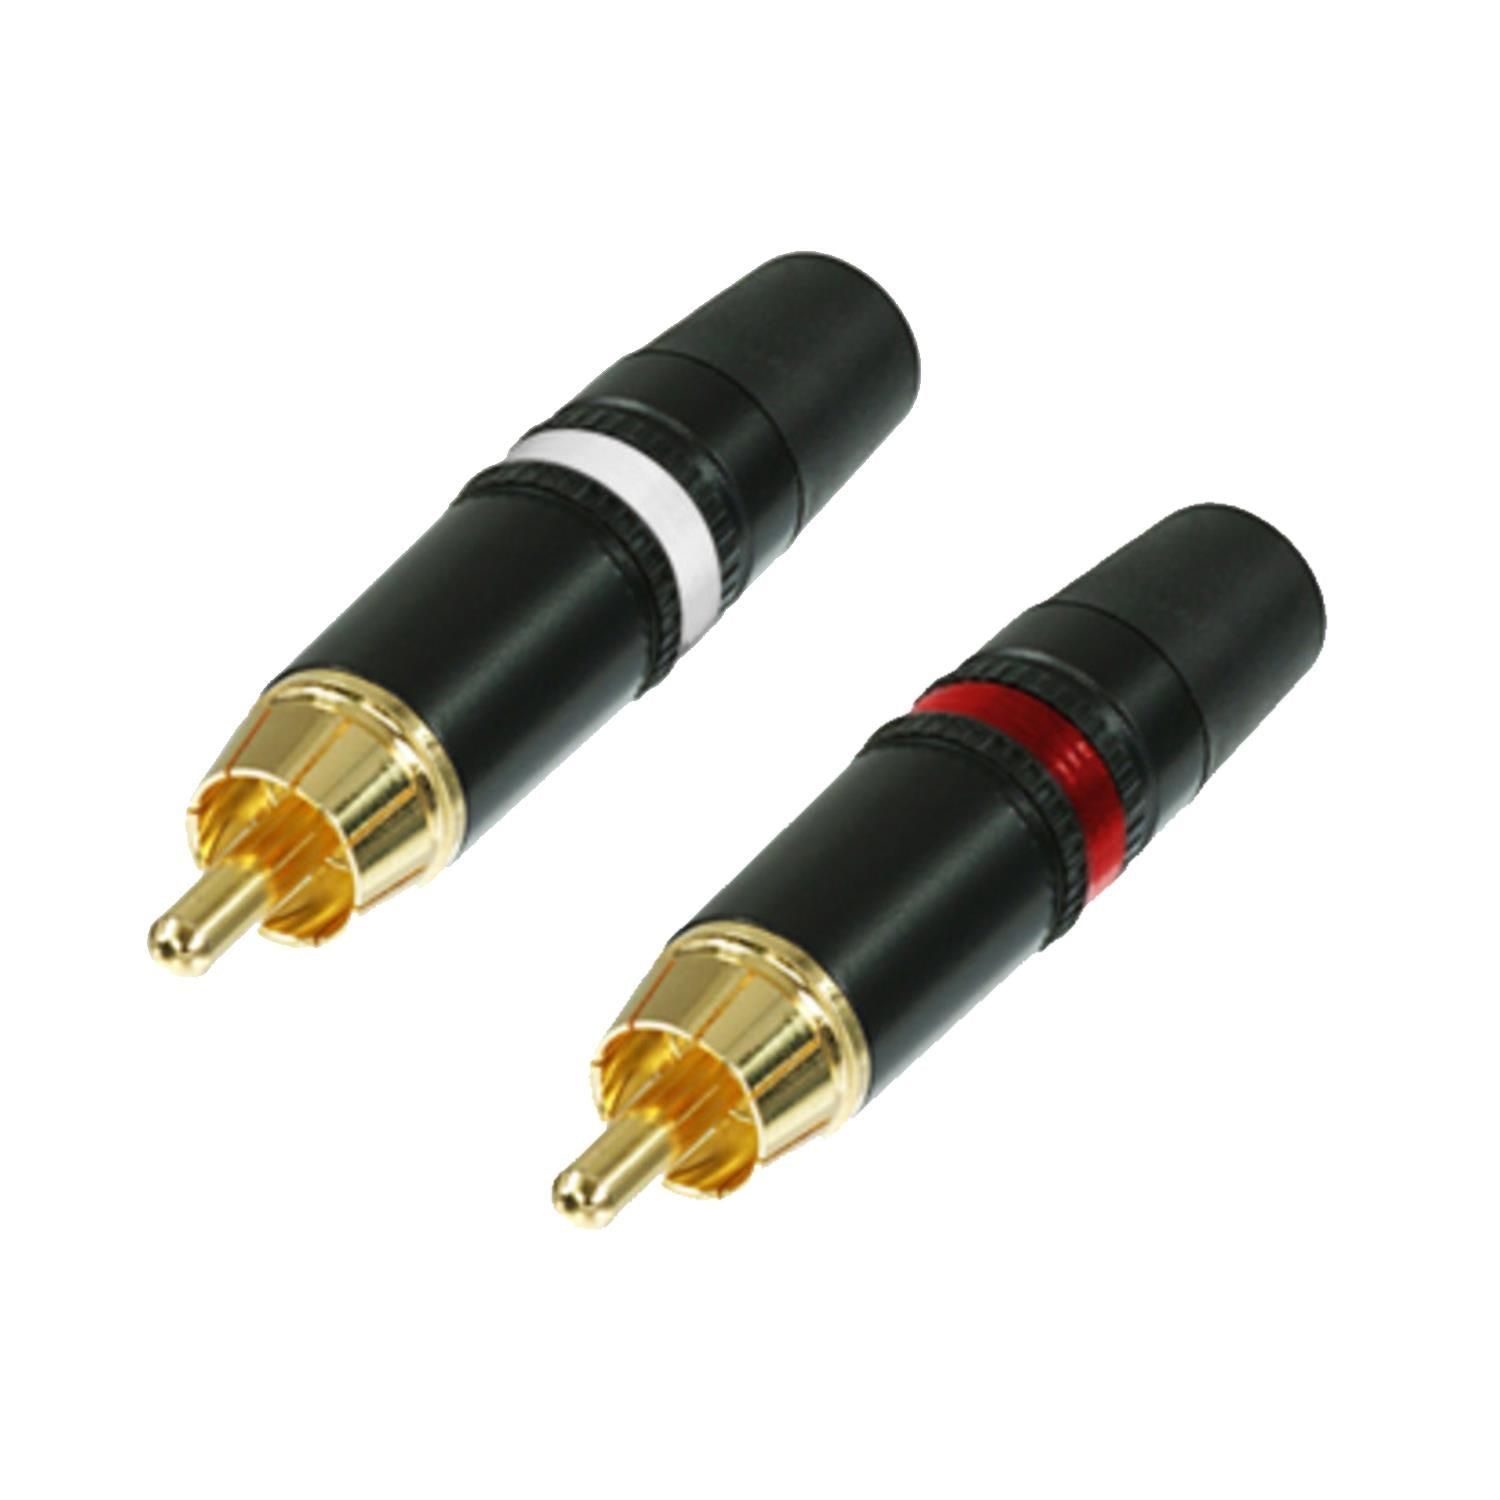 2 x Neutrik NYS373 Red & White Phono Plug with Gold Plated Contacts - DY Pro Audio